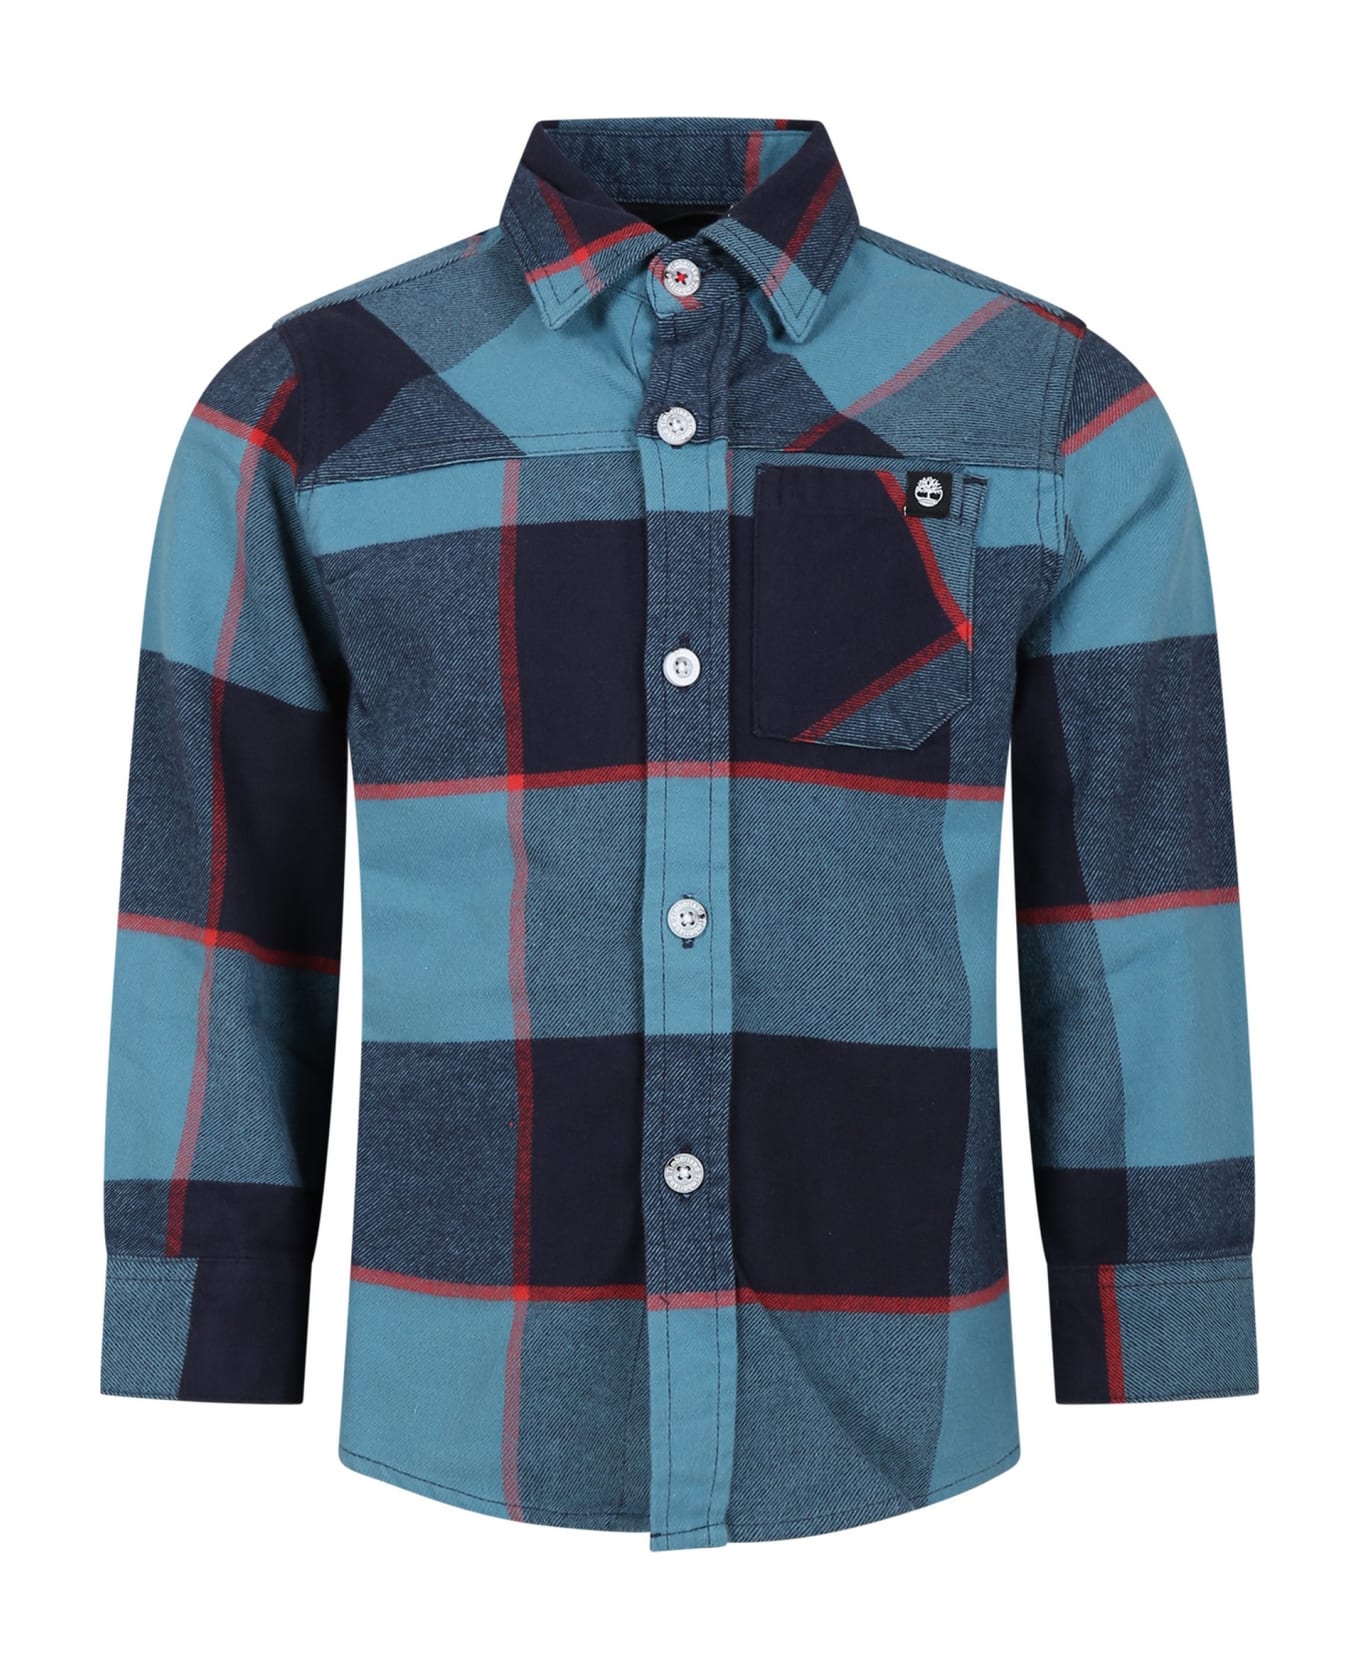 Timberland Blue Shirt For Boy With Logo - Blue